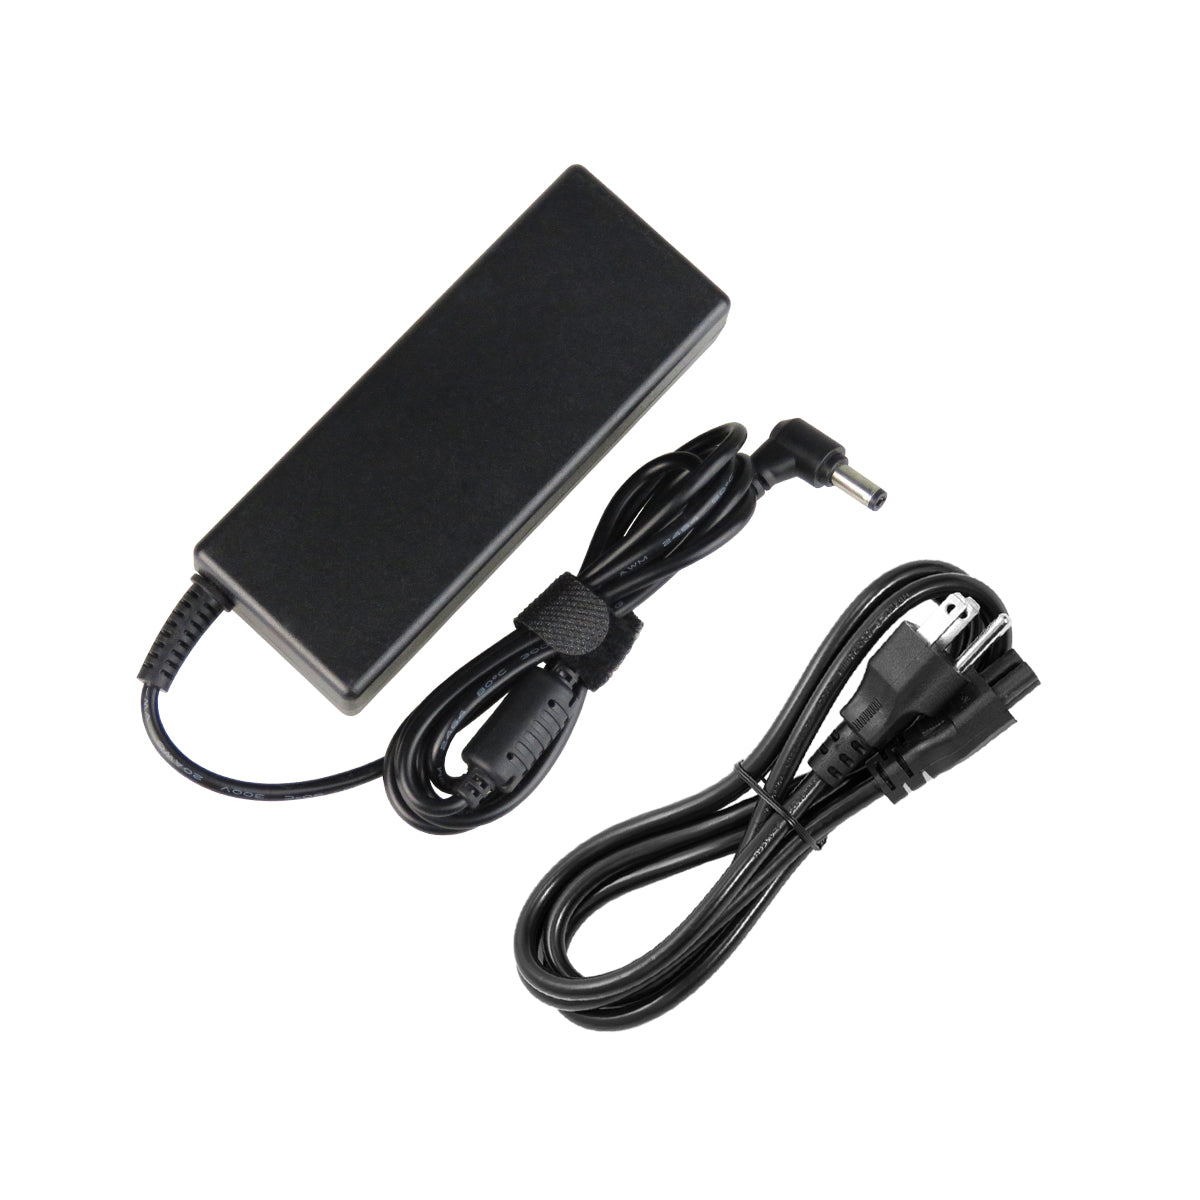 AC Adapter Charger for Toshiba Satellite c55-a5249 Notebook.